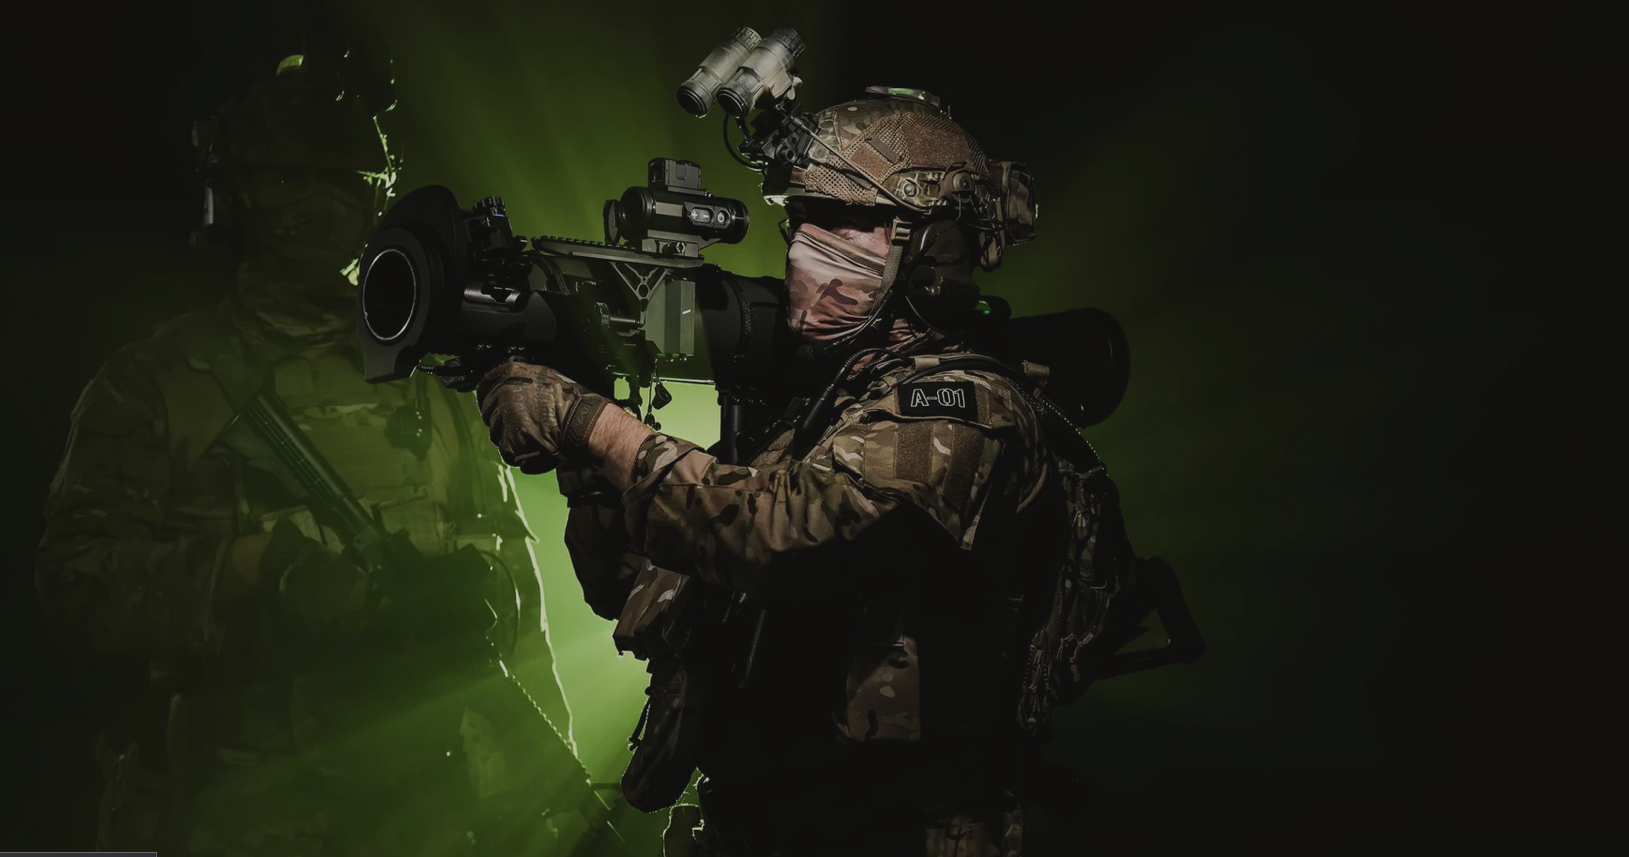 A soldier is seen in the center of the image carrying a Saab Carl-Gustaf Rifle on his shoulder. The background is tinted with green light, making the soldier cast a shadow on most of the image's right.